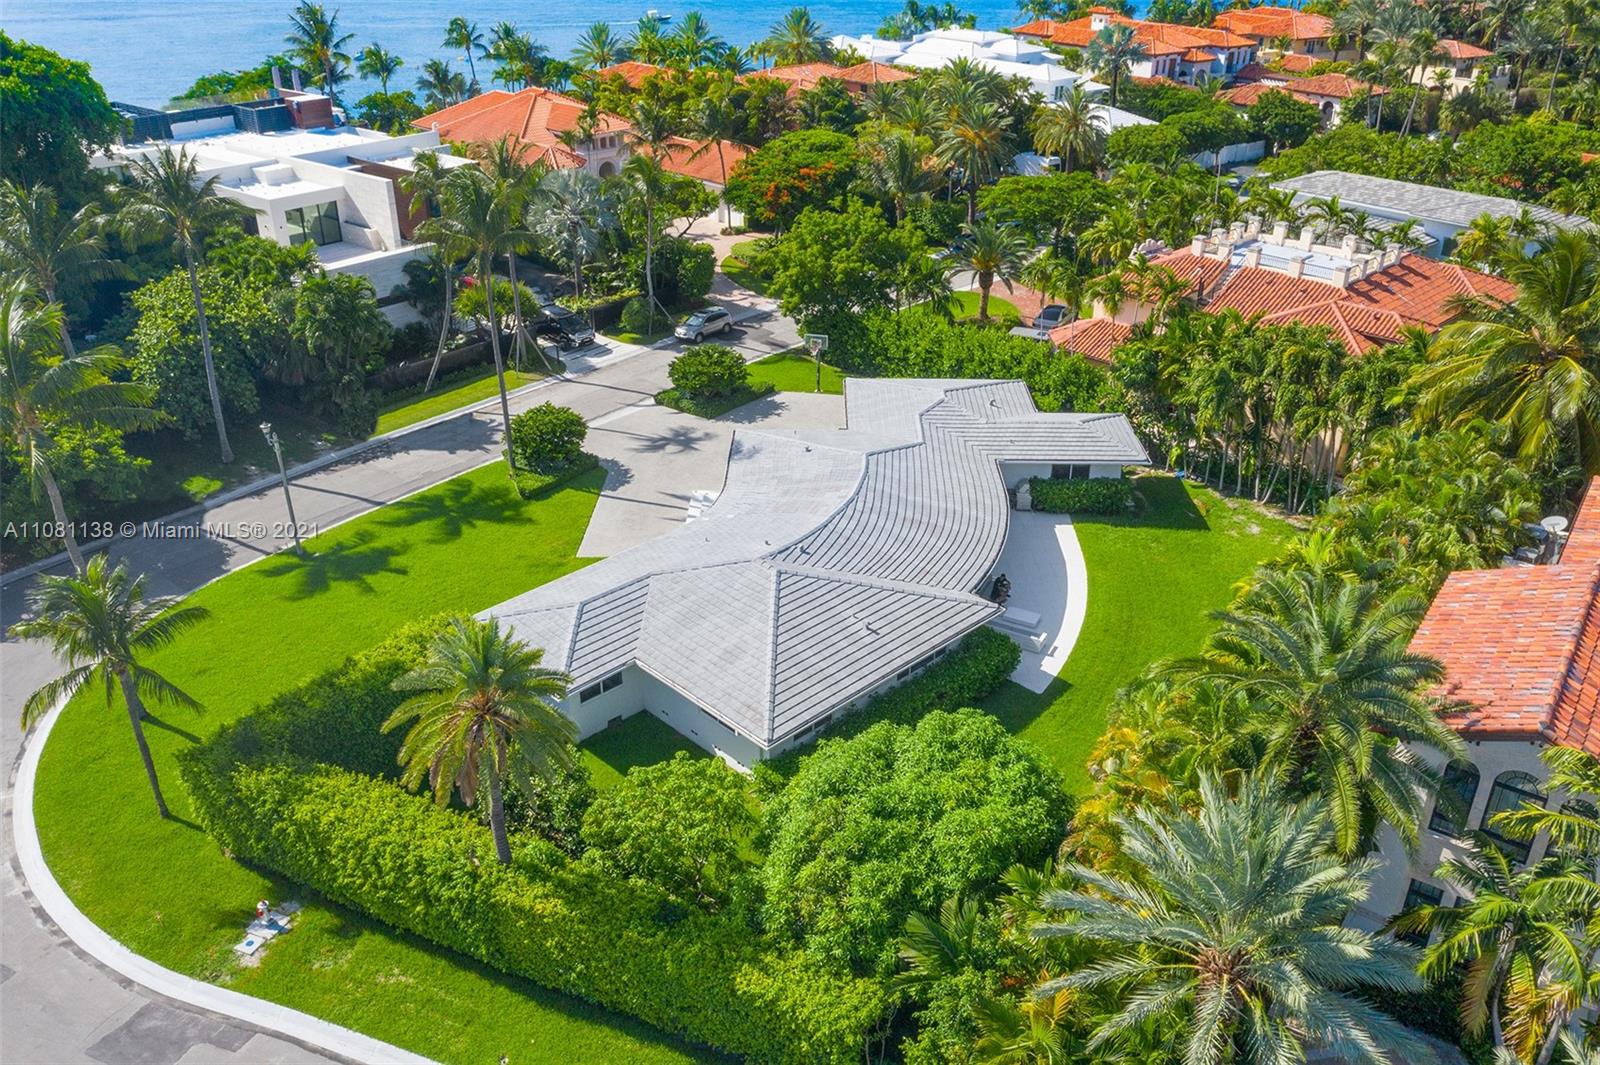 This modern renovated home in the exclusive guard-gated Bal Harbour Village, one of the most private and secure communities in Miami is located on coveted Bal Bay Drive with an oversized 18,000 sq.ft corner lot. Steps from the Bal Harbour beach, world-class shopping and dining at the Bal Harbour Shops, and five-star hotels, houses of worship, private park and much more.